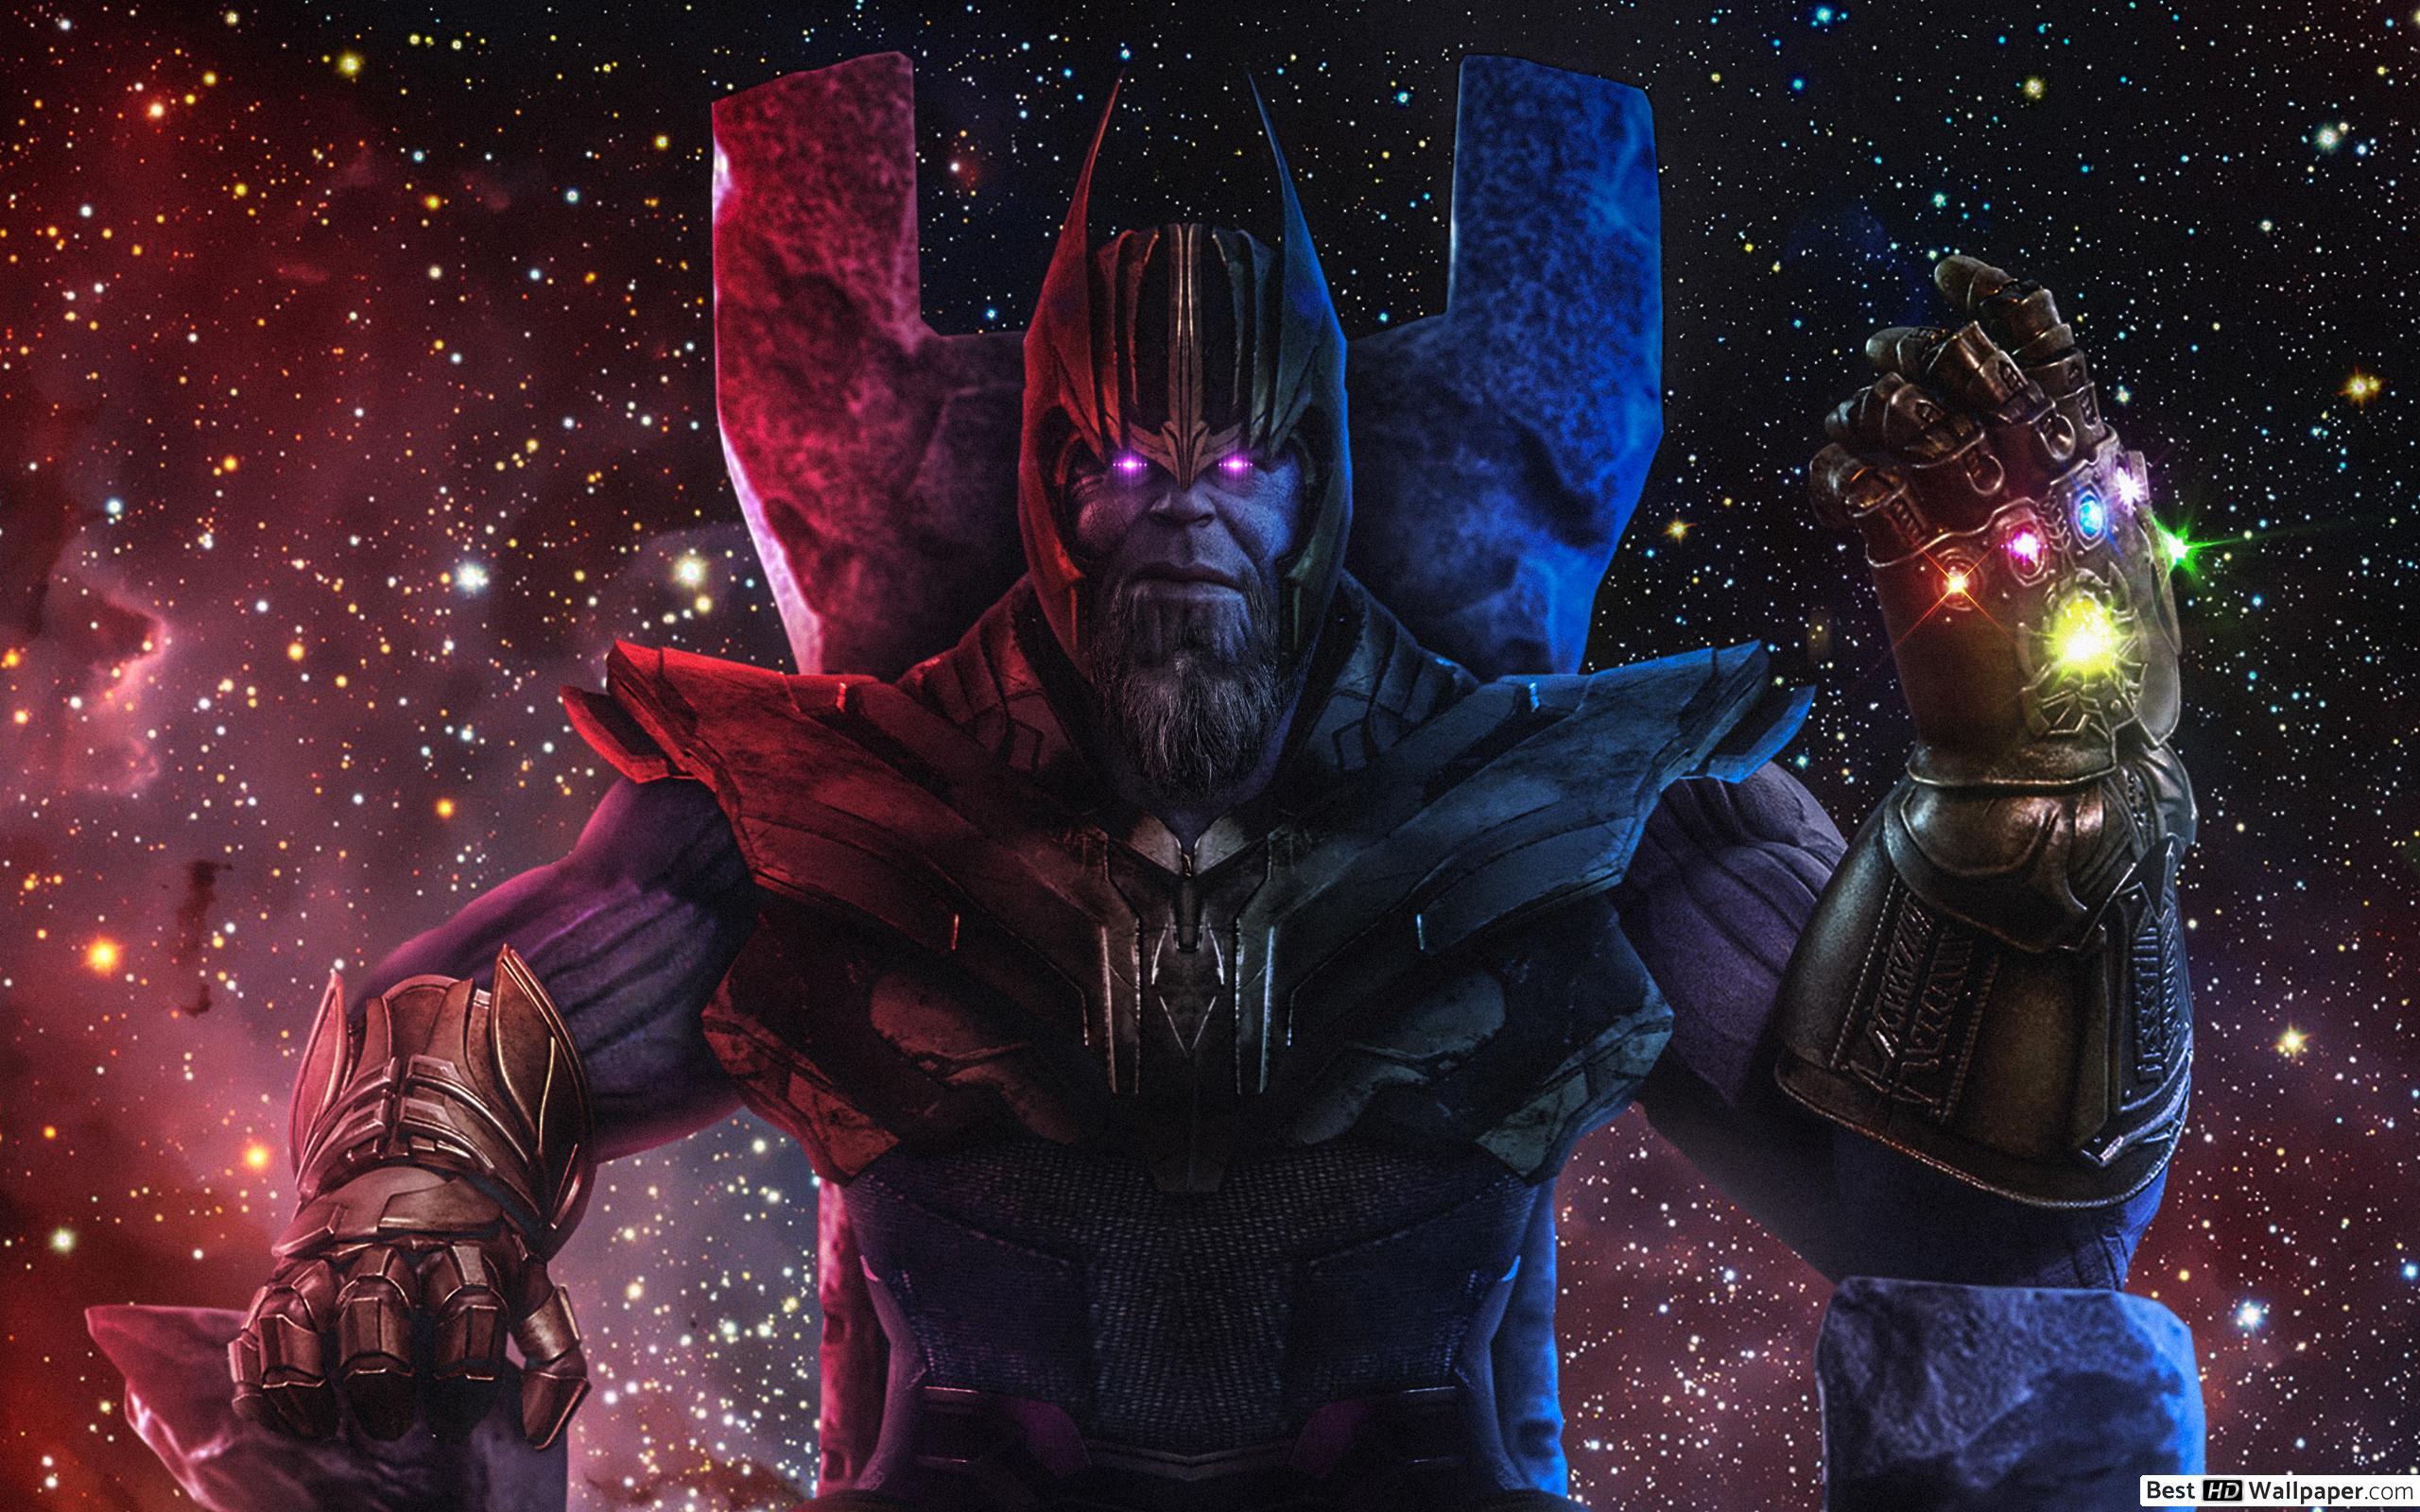 Avengers: Endgame with Infinity glove HD wallpaper download